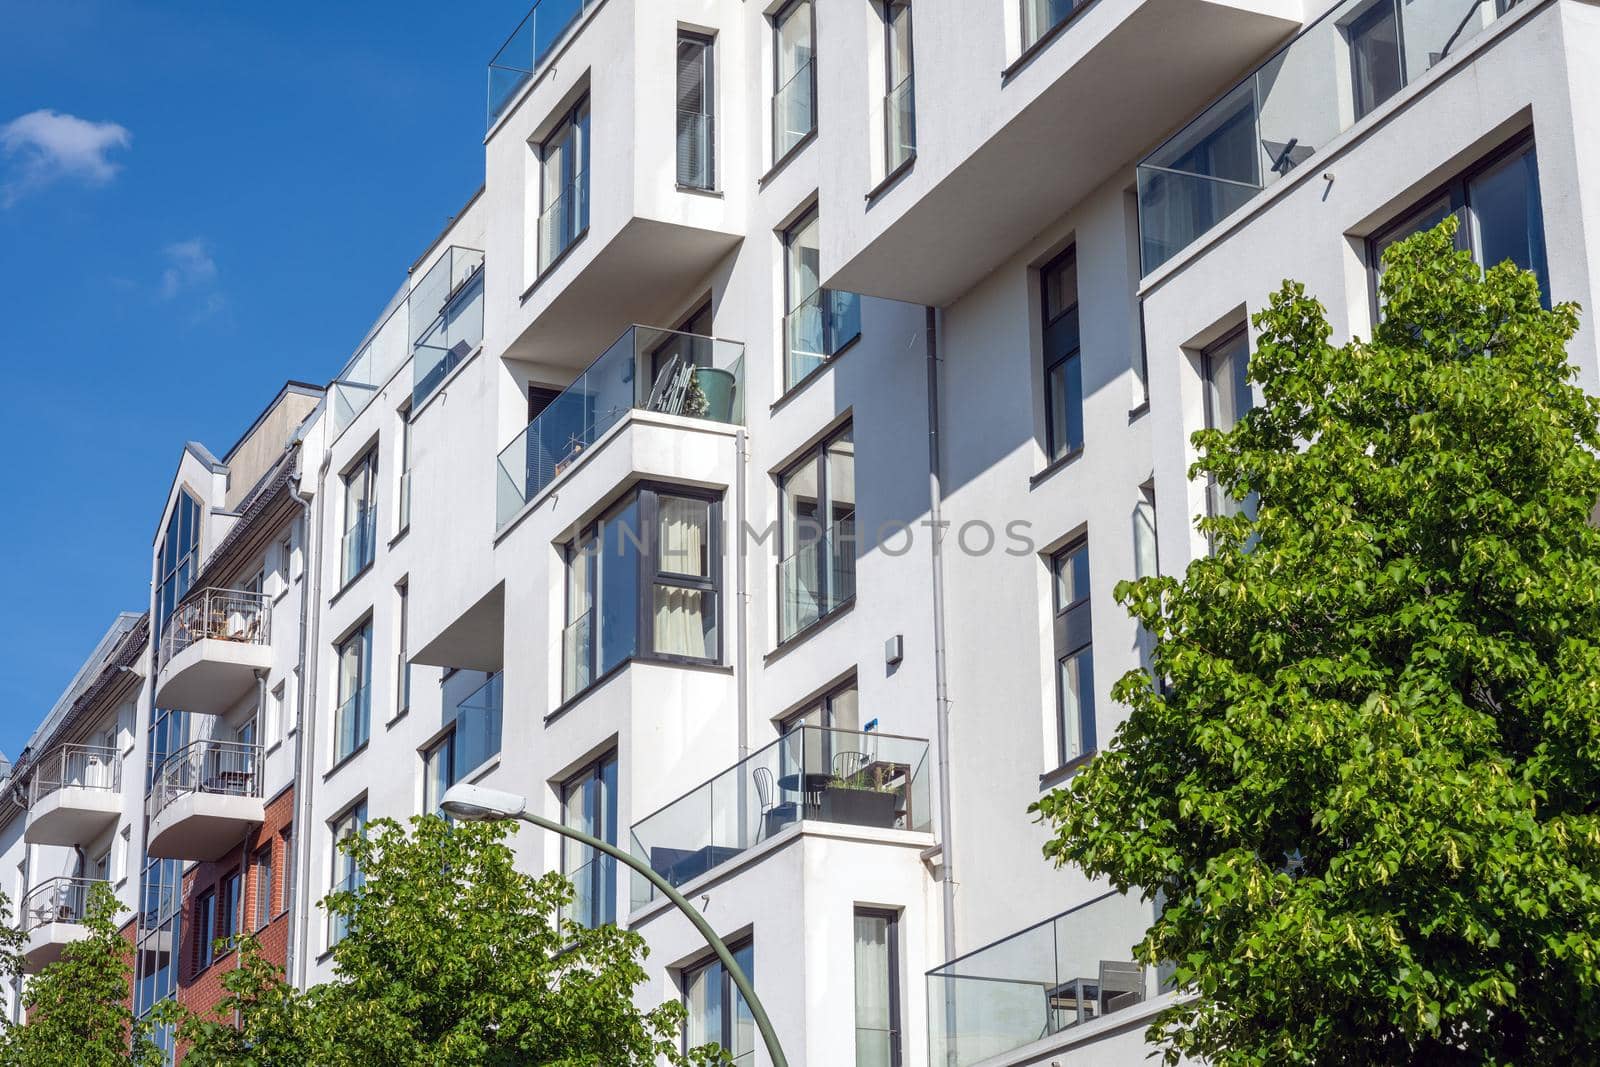 Modern white apartment building seen in Berlin, Germany